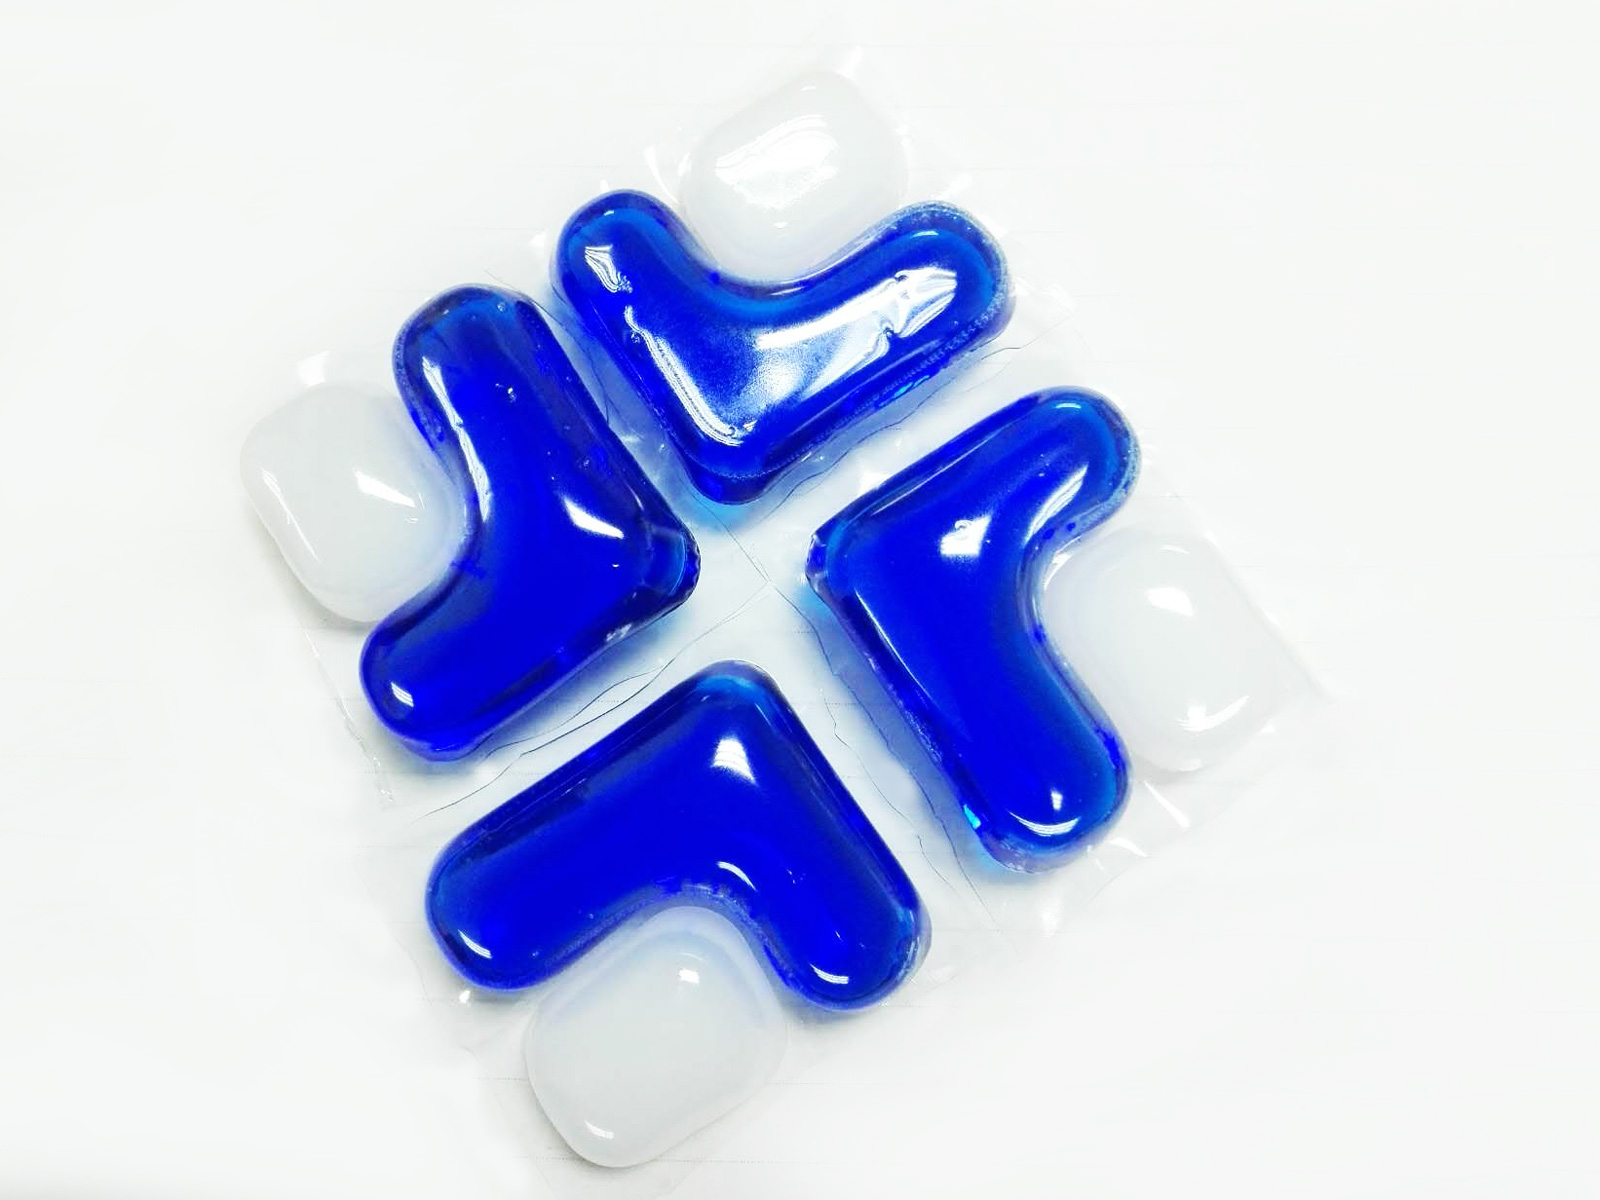 2 in 1 laundry pods white & blue